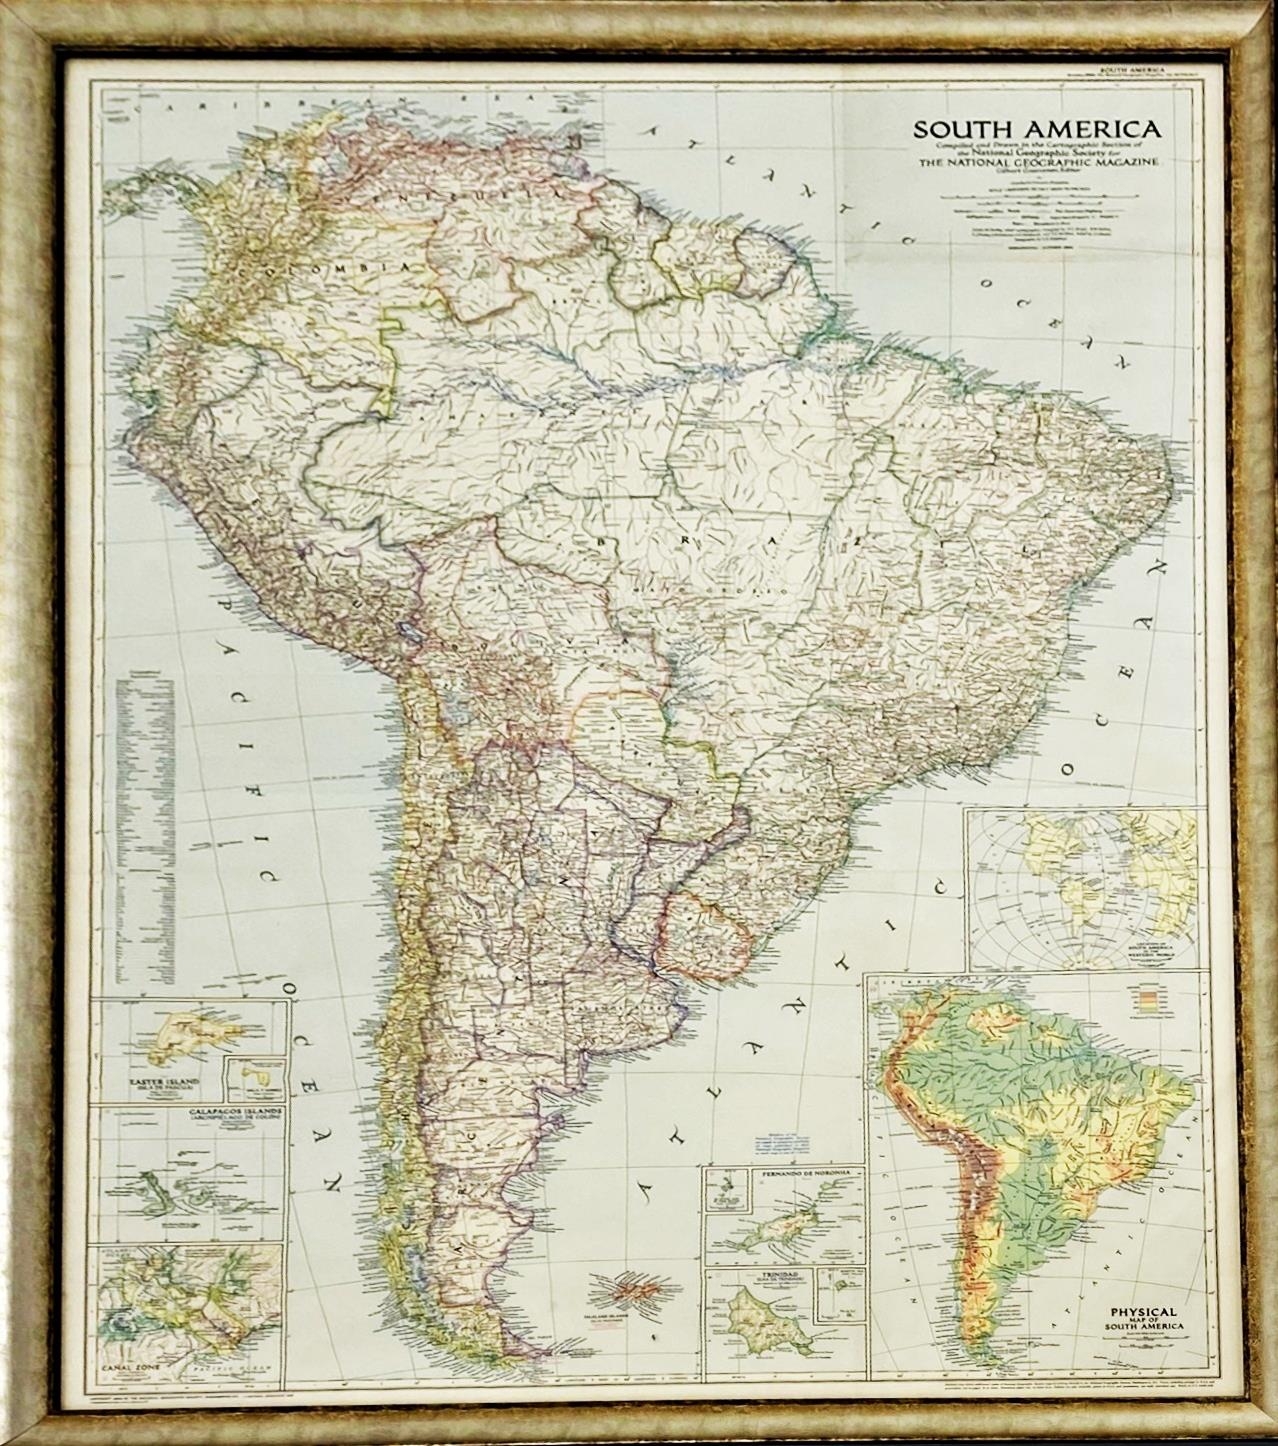 1950's National Geographic map of South America, 100cm x 70cm, framed